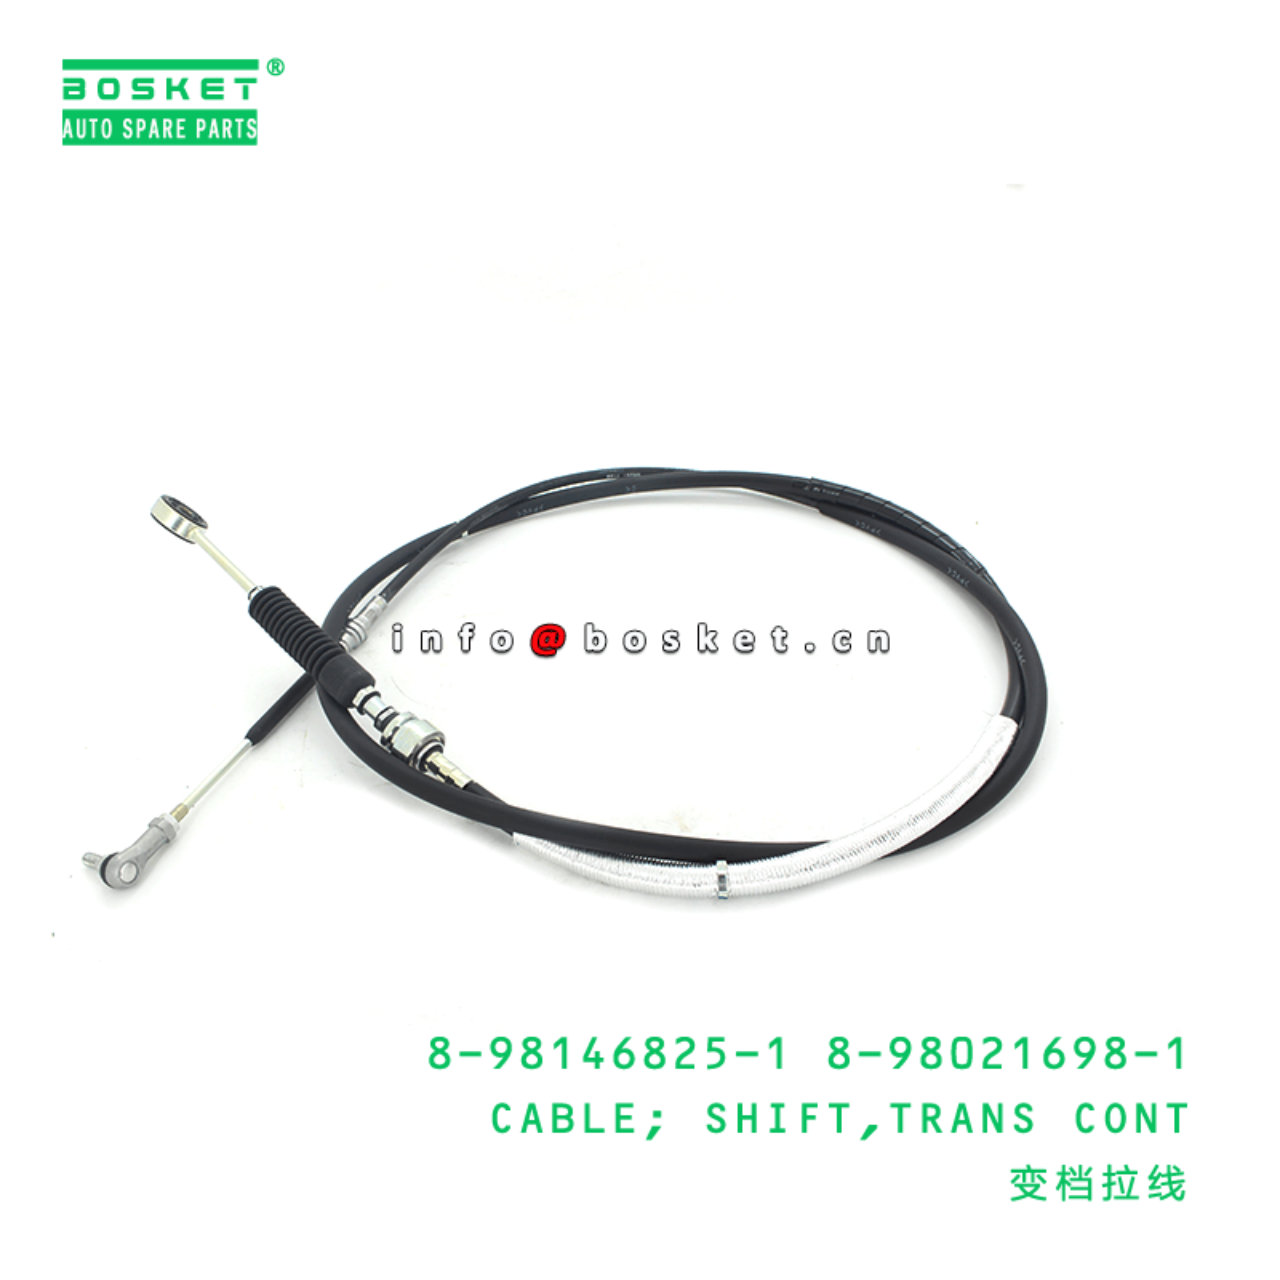 8-98146825-1 8-98021698-1 Transmission Control Shift Cable 8981468251 8980216981 Suitable for ISUZU 